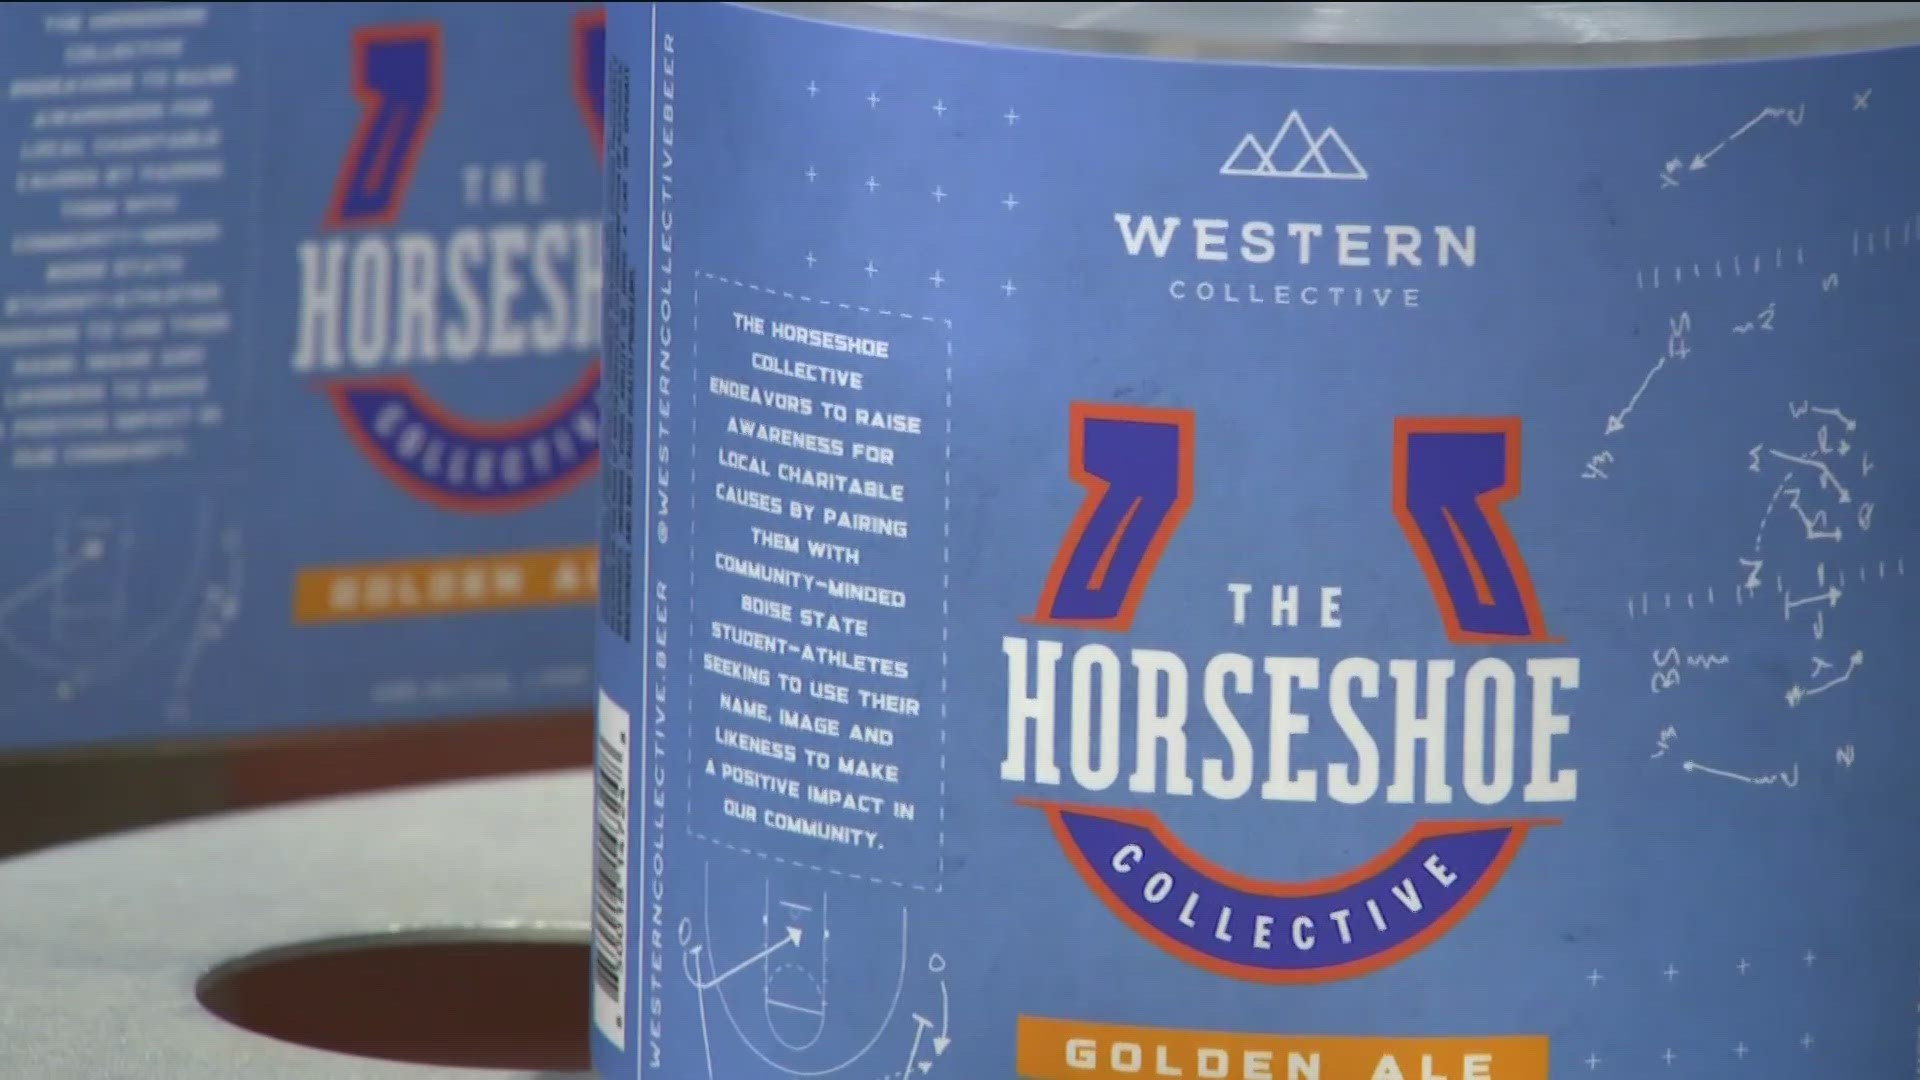 Proceeds from the Horseshoe Golden Ale will benefit Boise State athletes through The Horseshoe Collective. The can features plays drawn by Leon Rice and Andy Avalos.